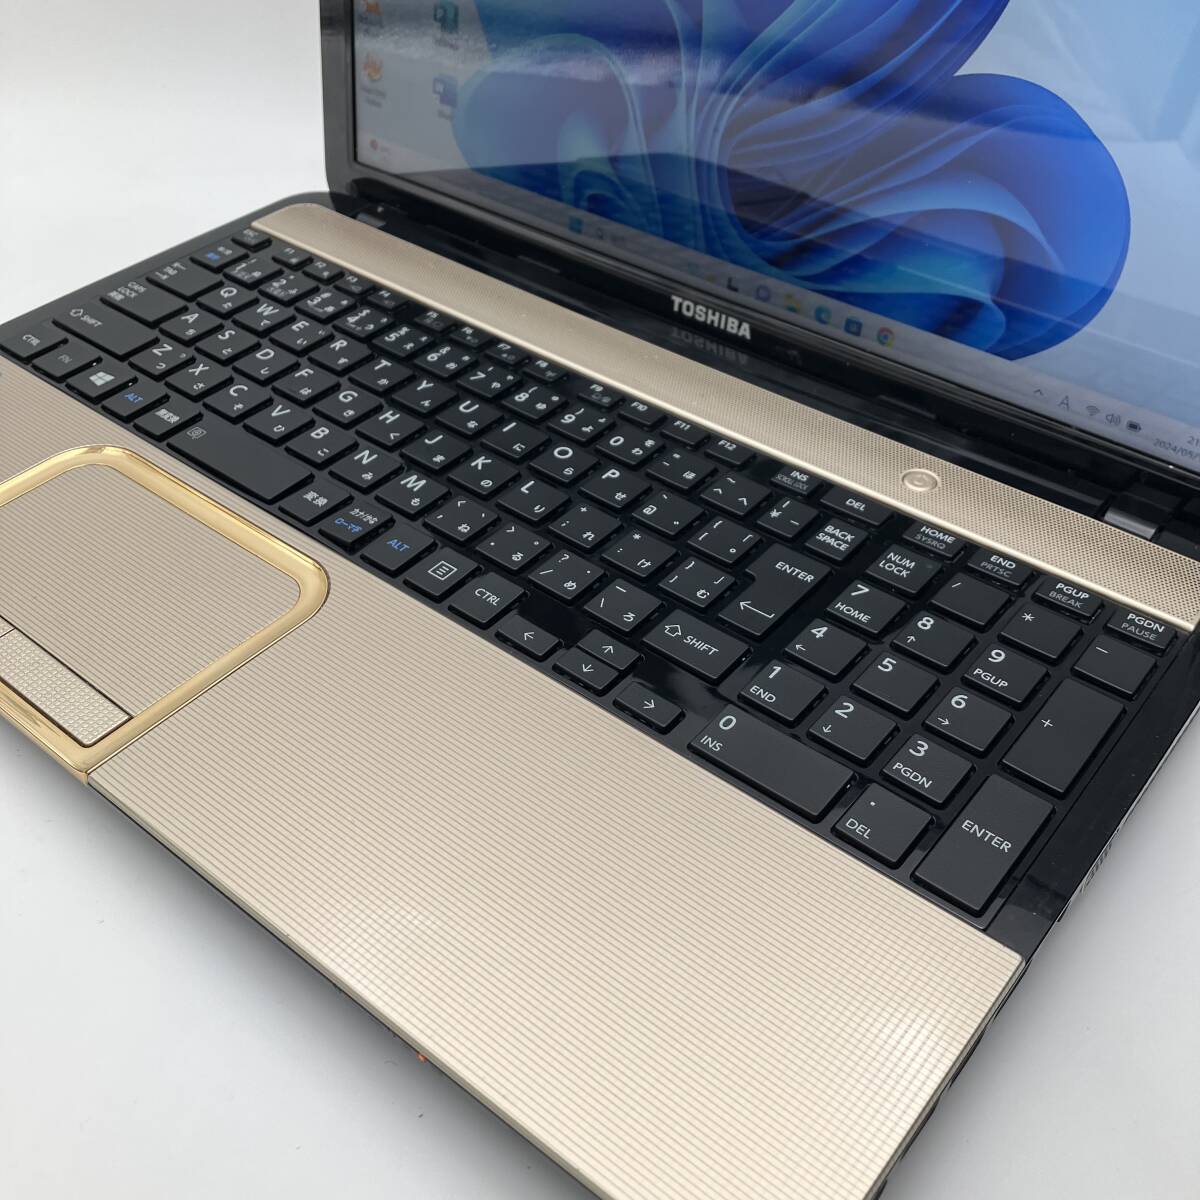  strongest i7* memory 16GB*. speed new goods SSD*Core i7-3.40GHz*Windows11 laptop *ONKYO made speaker *Office2021*USB3.0* free privilege 1TB and more 